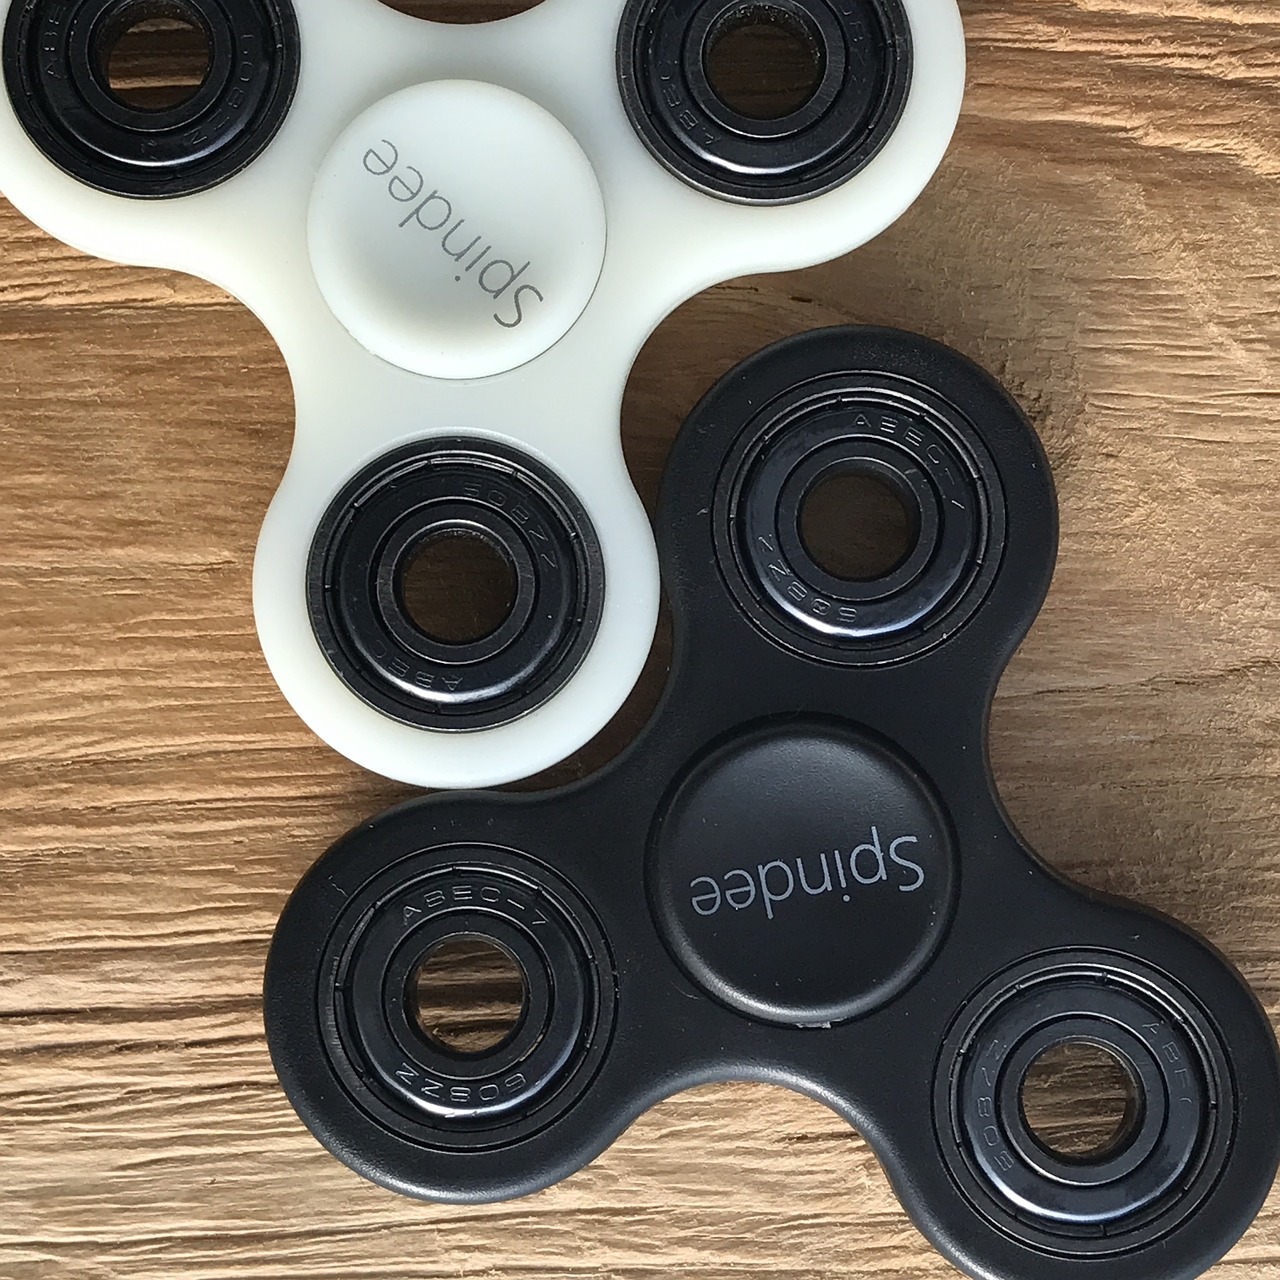 fidget spinner black and white skill toy free photo